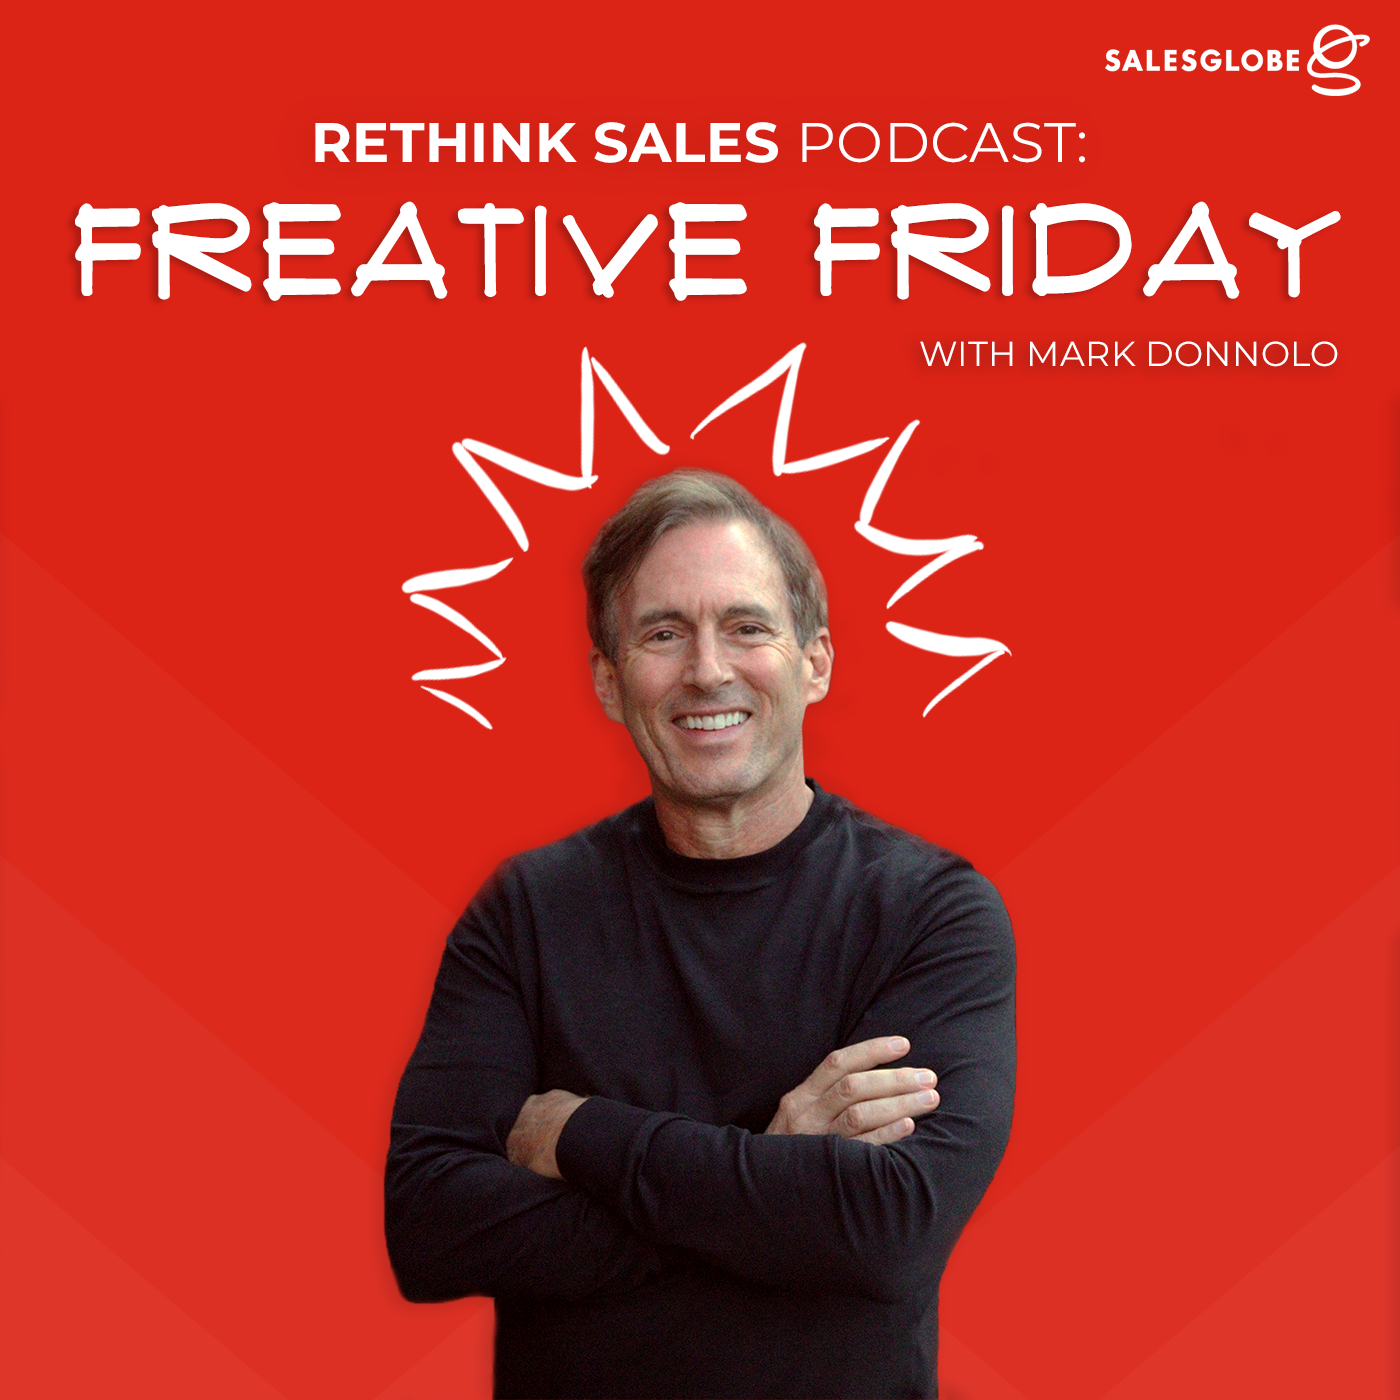 67: Freative Friday - Increasing ROSI by Pumping Up Your Pipeline Part 2